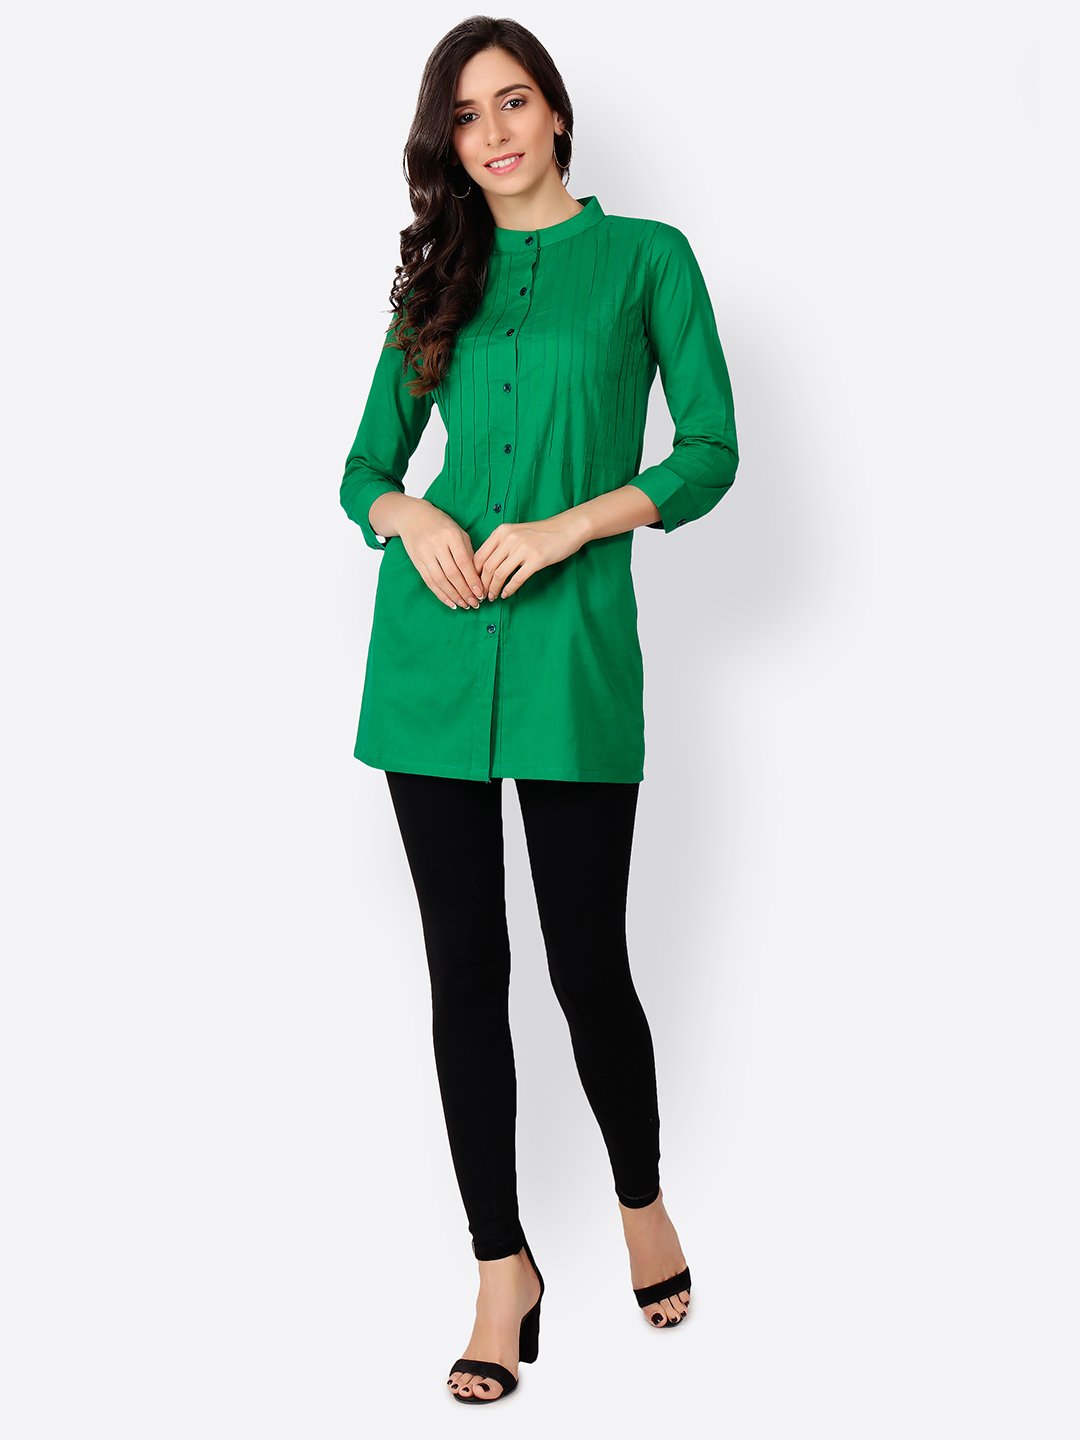 Cation Green Tunic